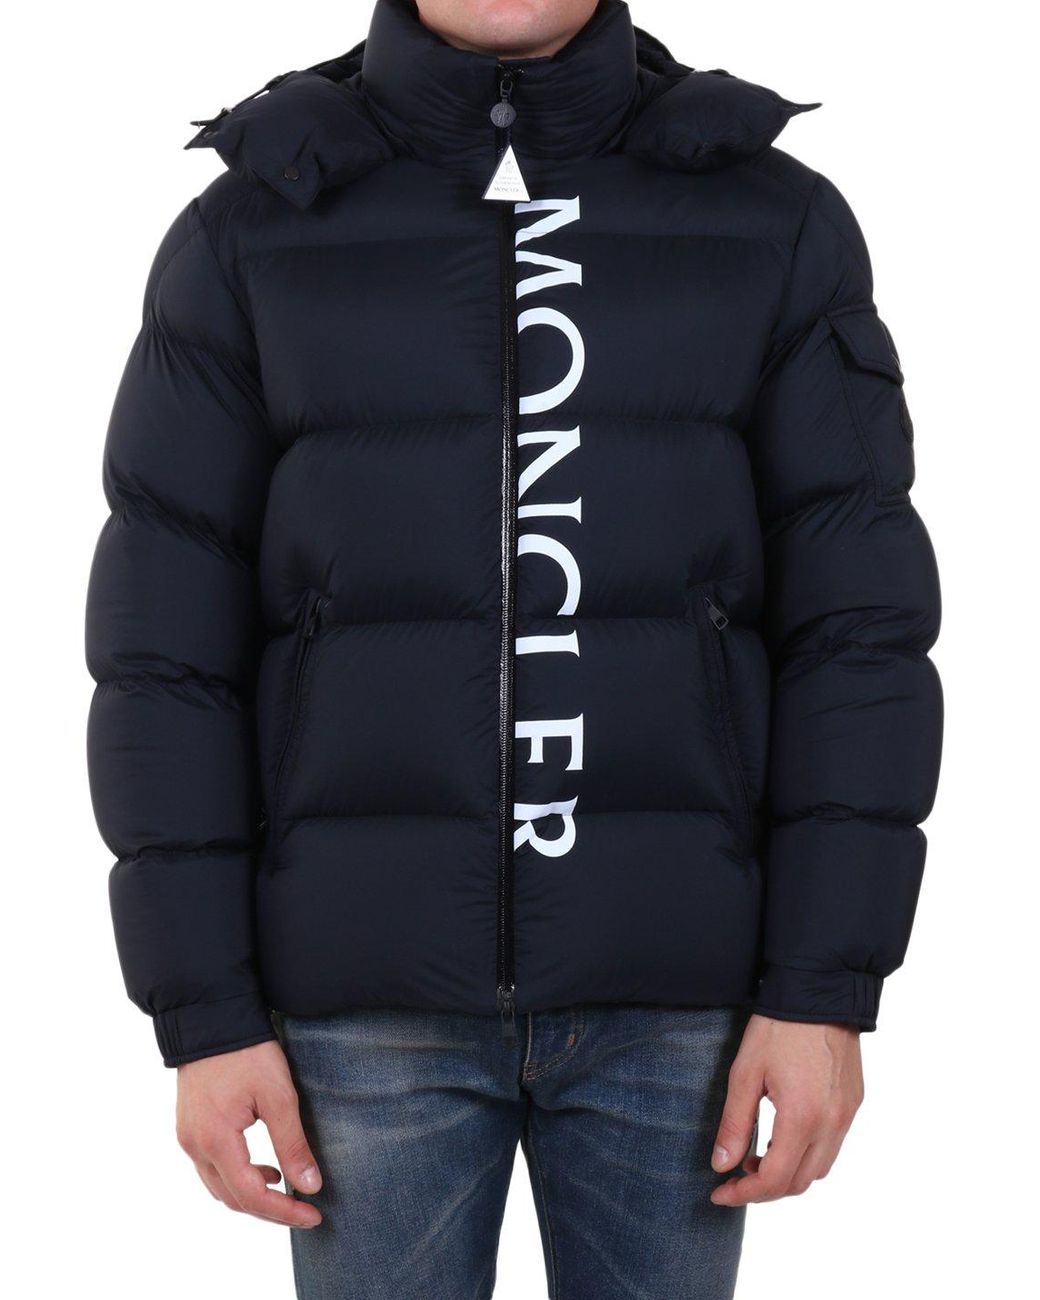 Moncler Synthetic Maures Down Jacket in Blue for Men - Lyst